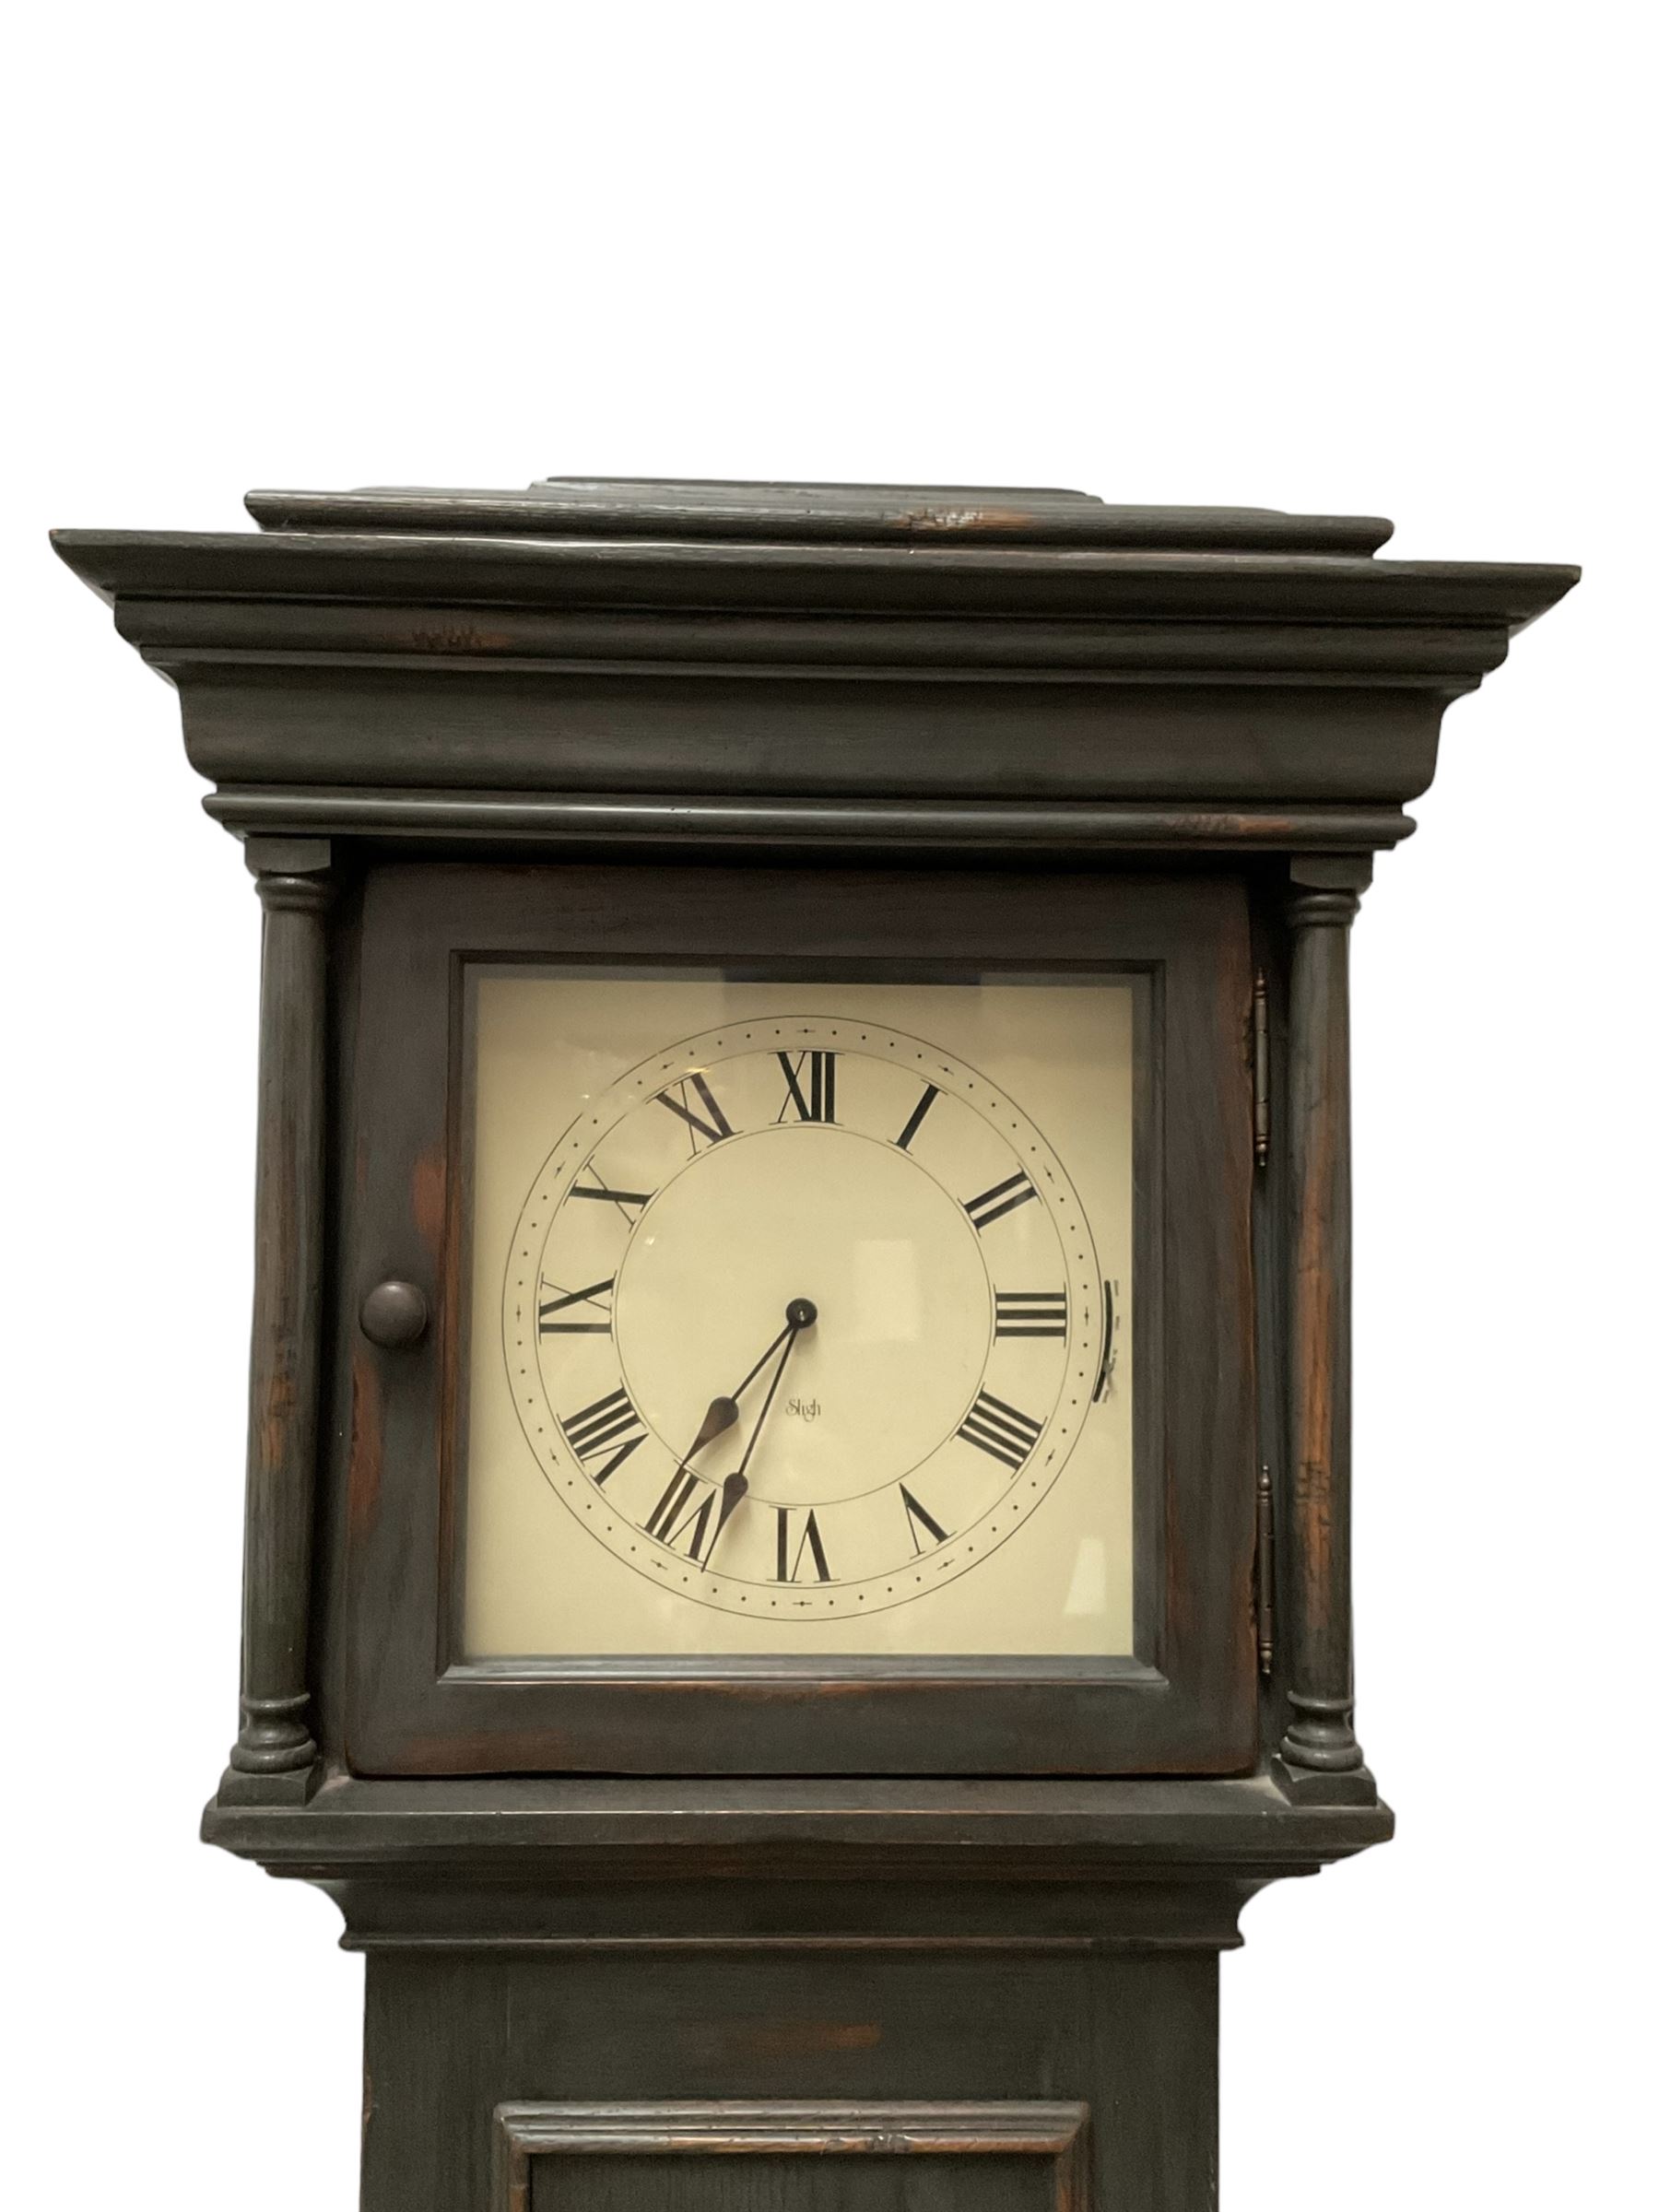 20th century - contemporary longcase clock in an 18th century style case - Image 4 of 6